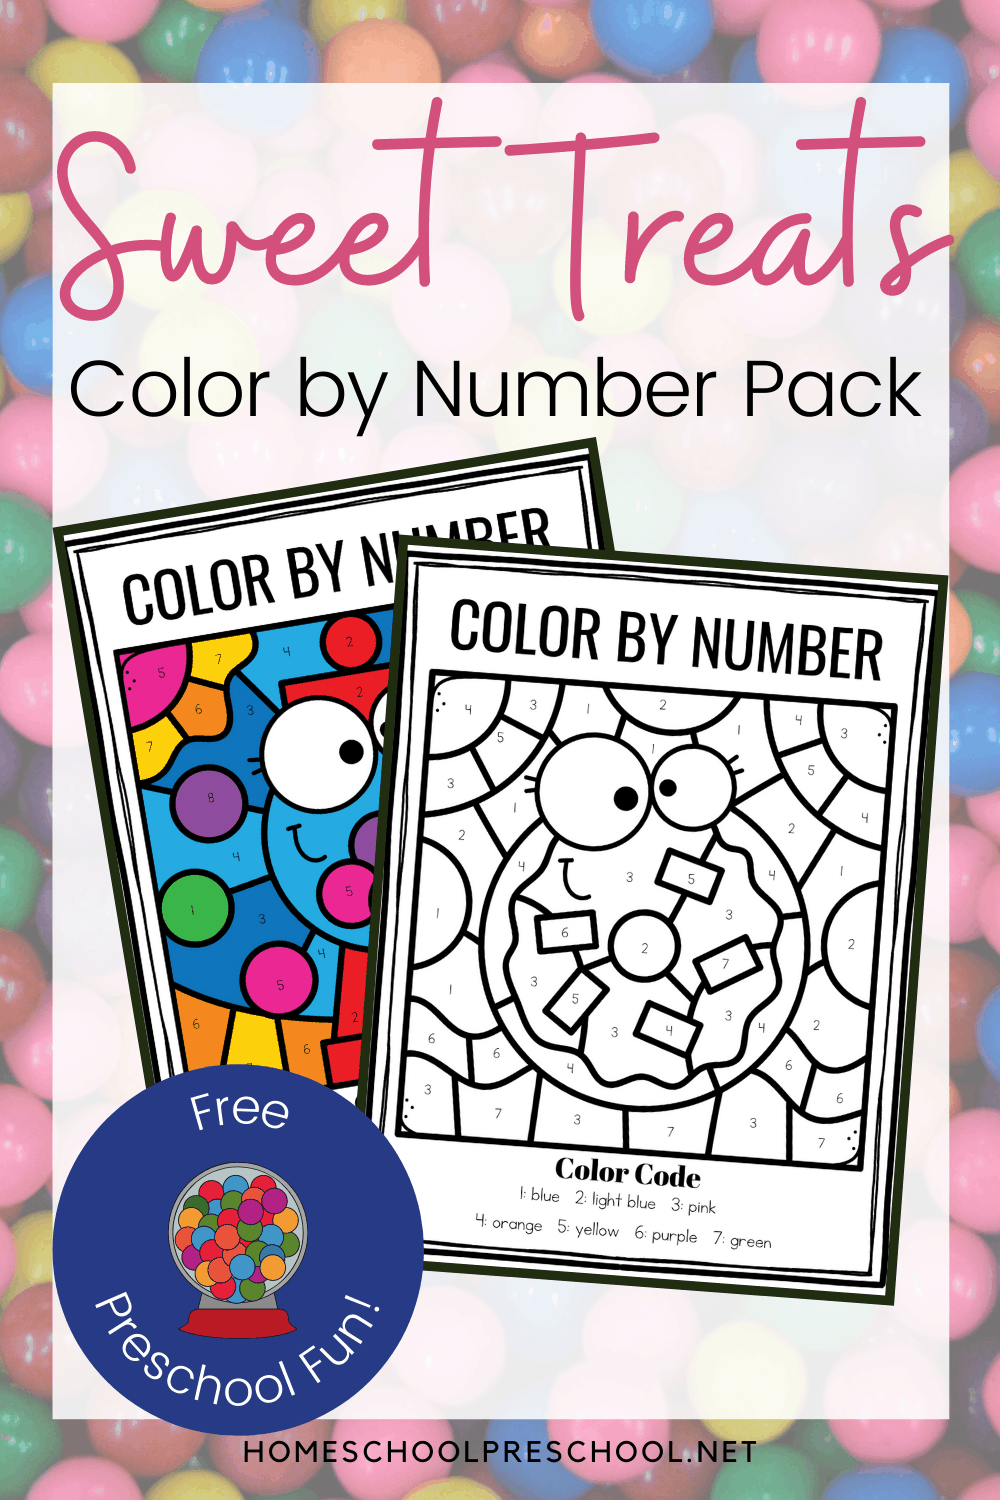 Sweet Treats Color By Number Printable